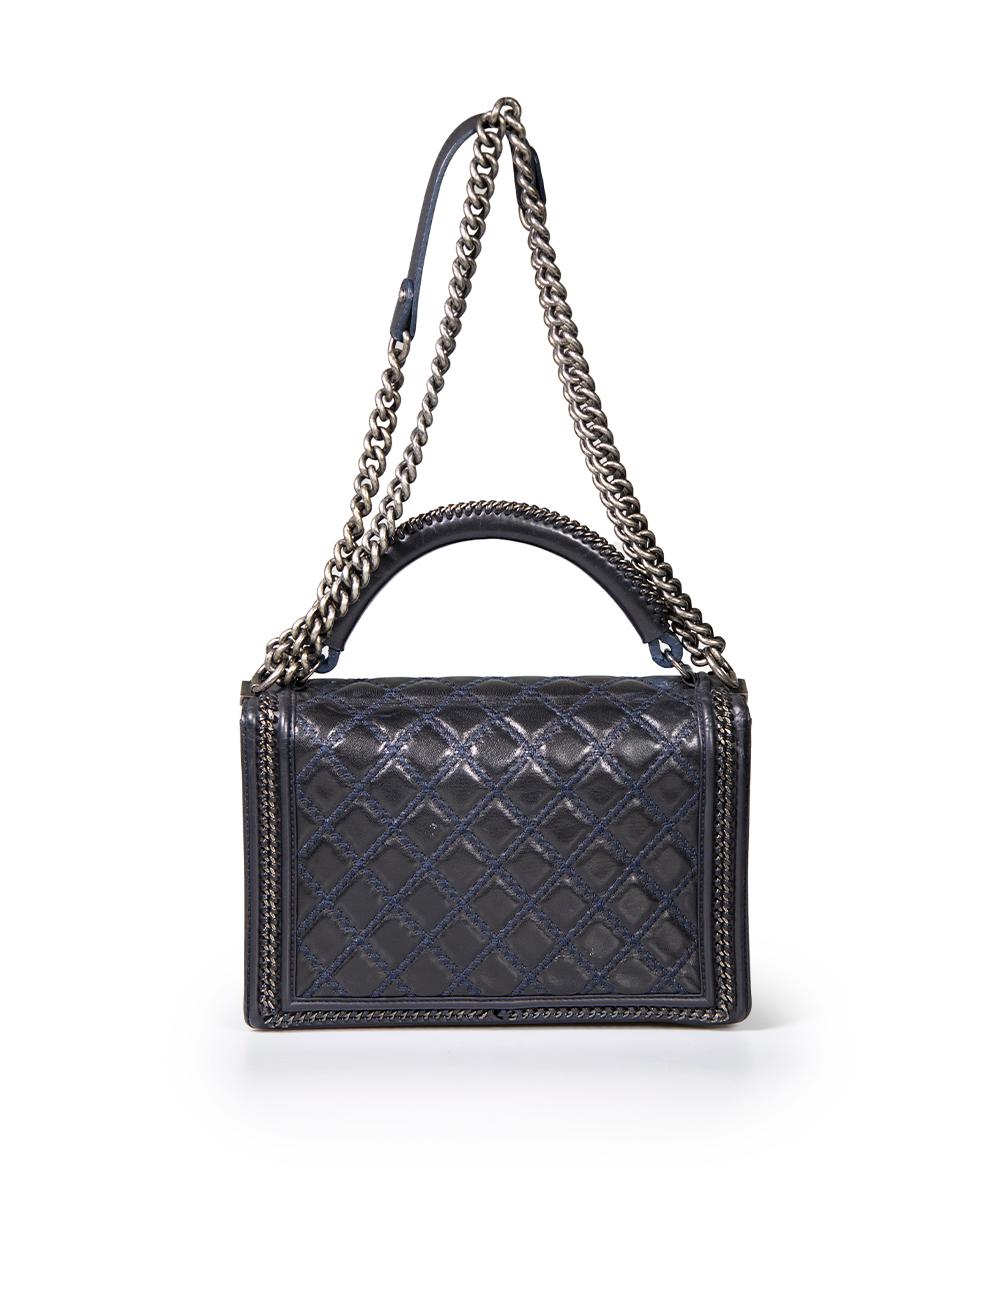 Chanel 2015-2016 Black Calfskin Quilted Chain Handle Large Boy Bag In Good Condition For Sale In London, GB